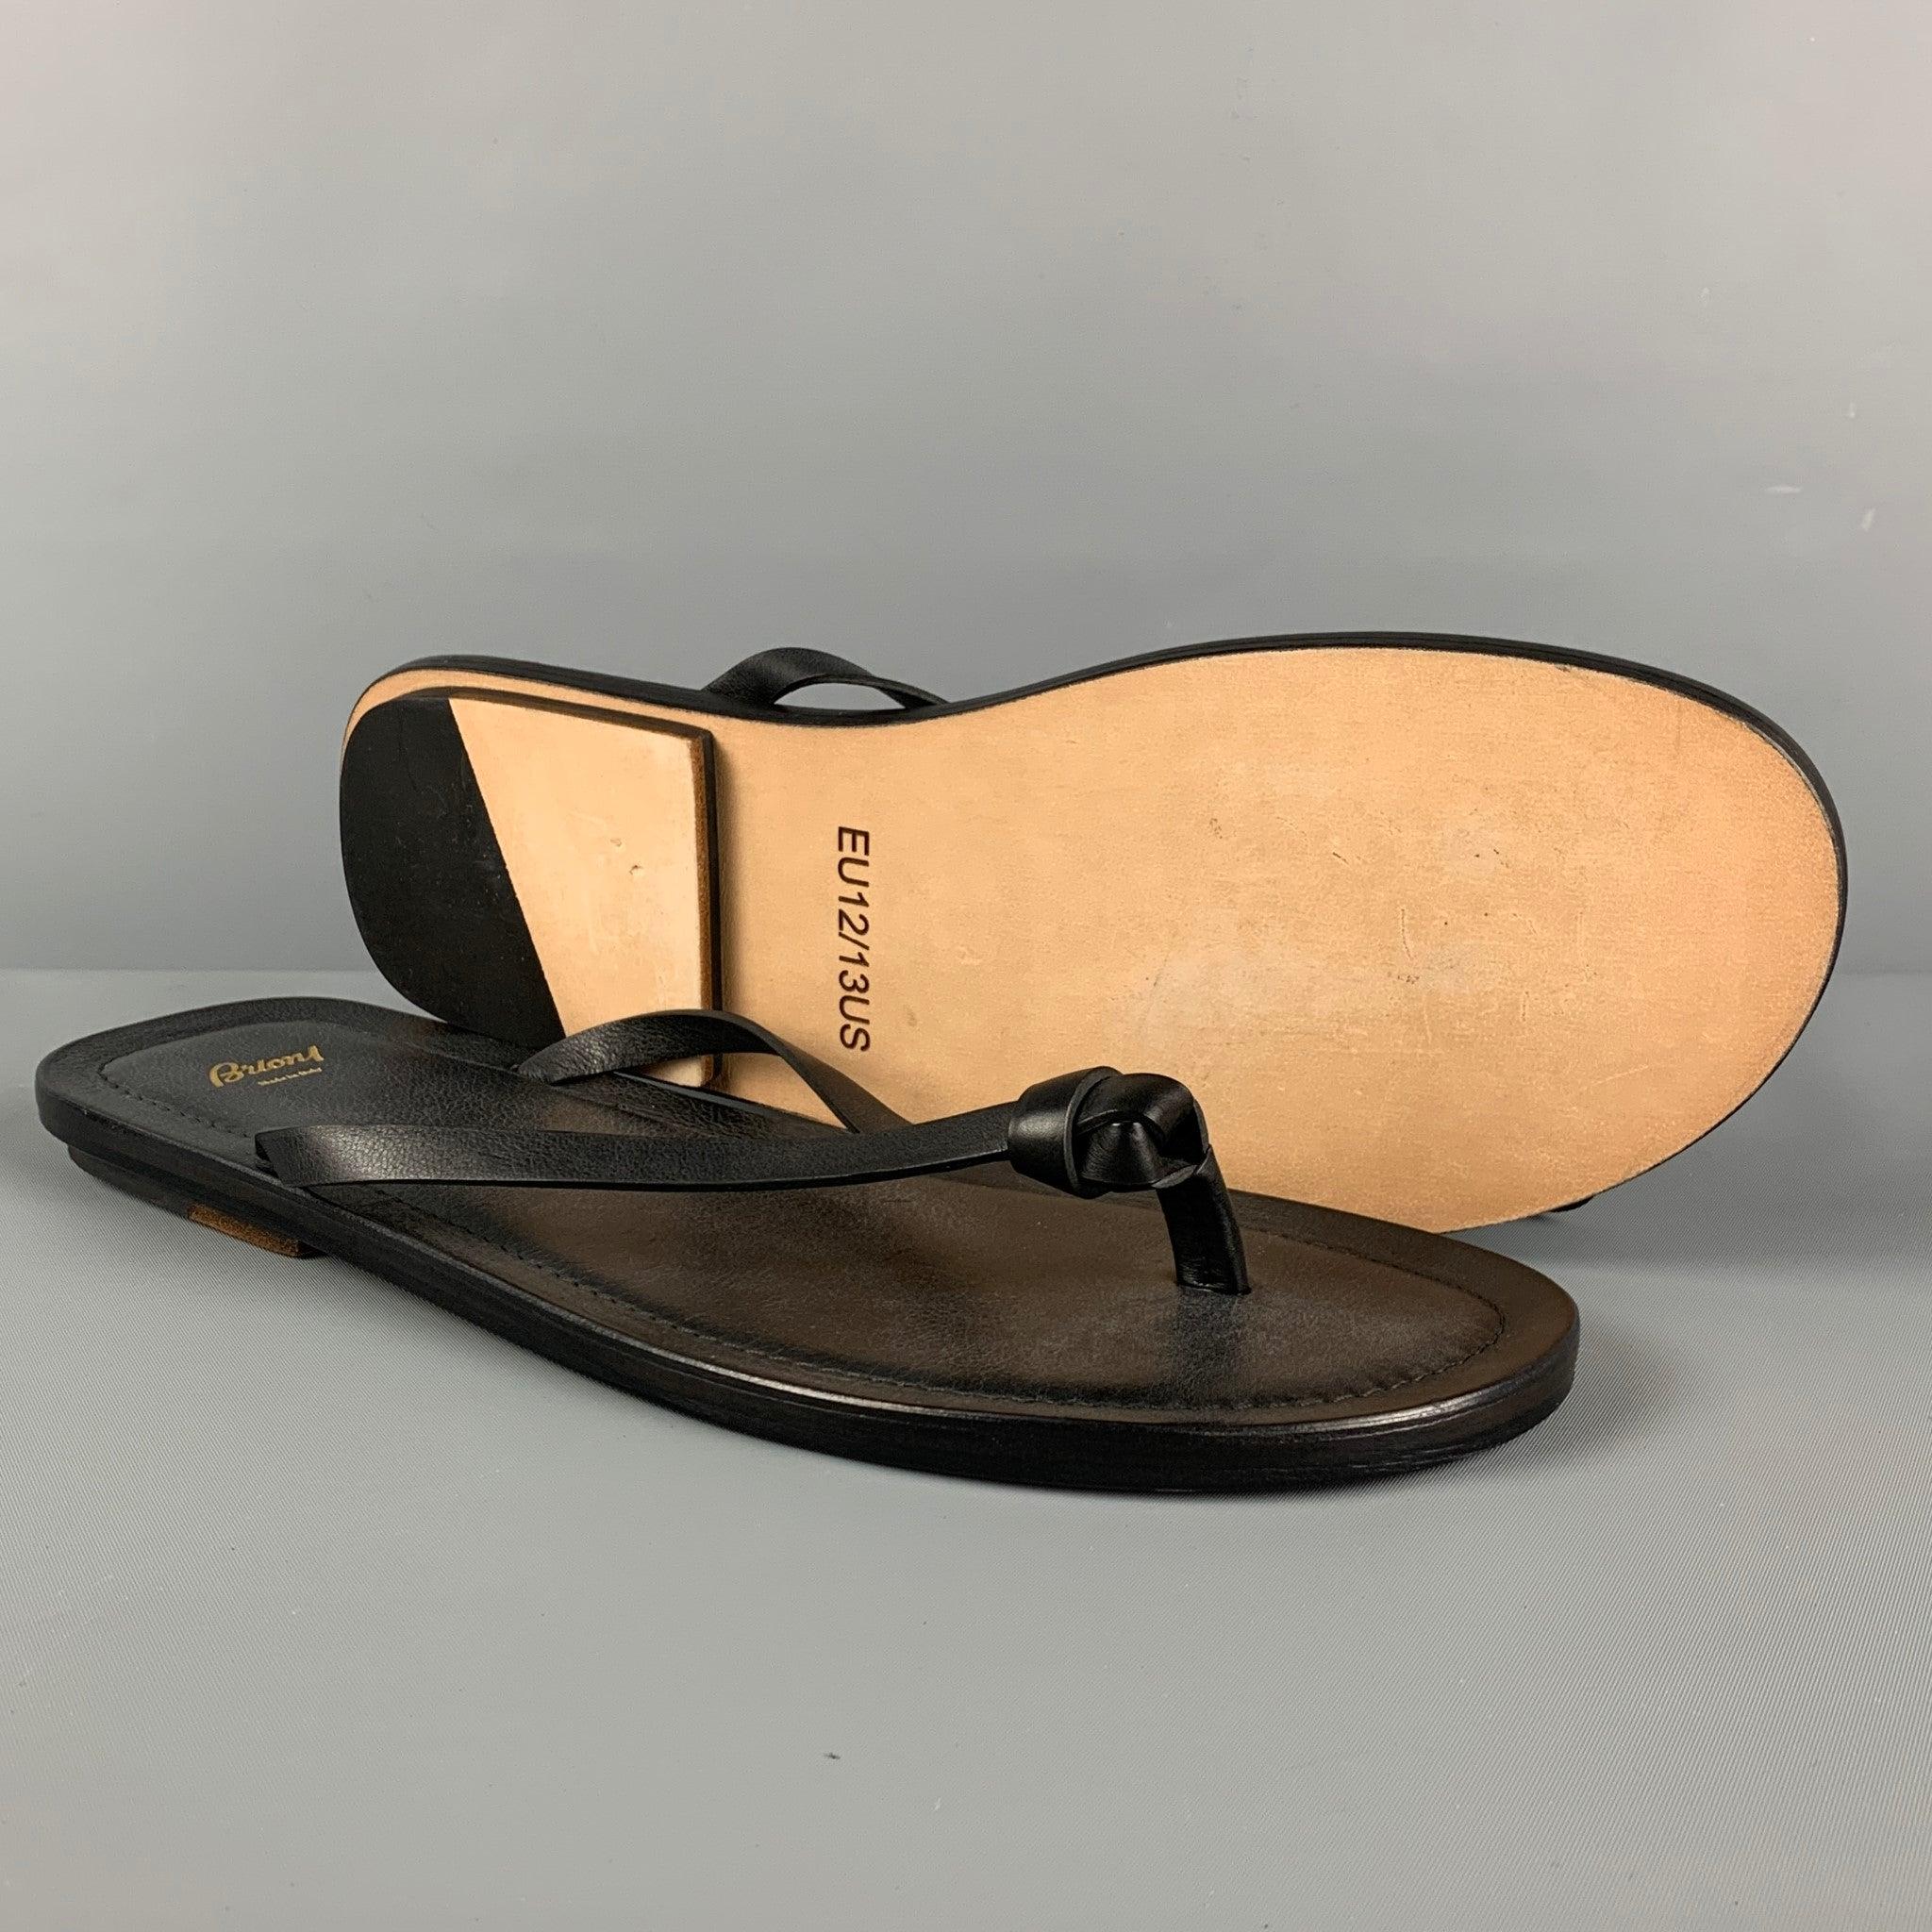 BRIONI Size 13 Black Leather Thong Sandals In Good Condition For Sale In San Francisco, CA